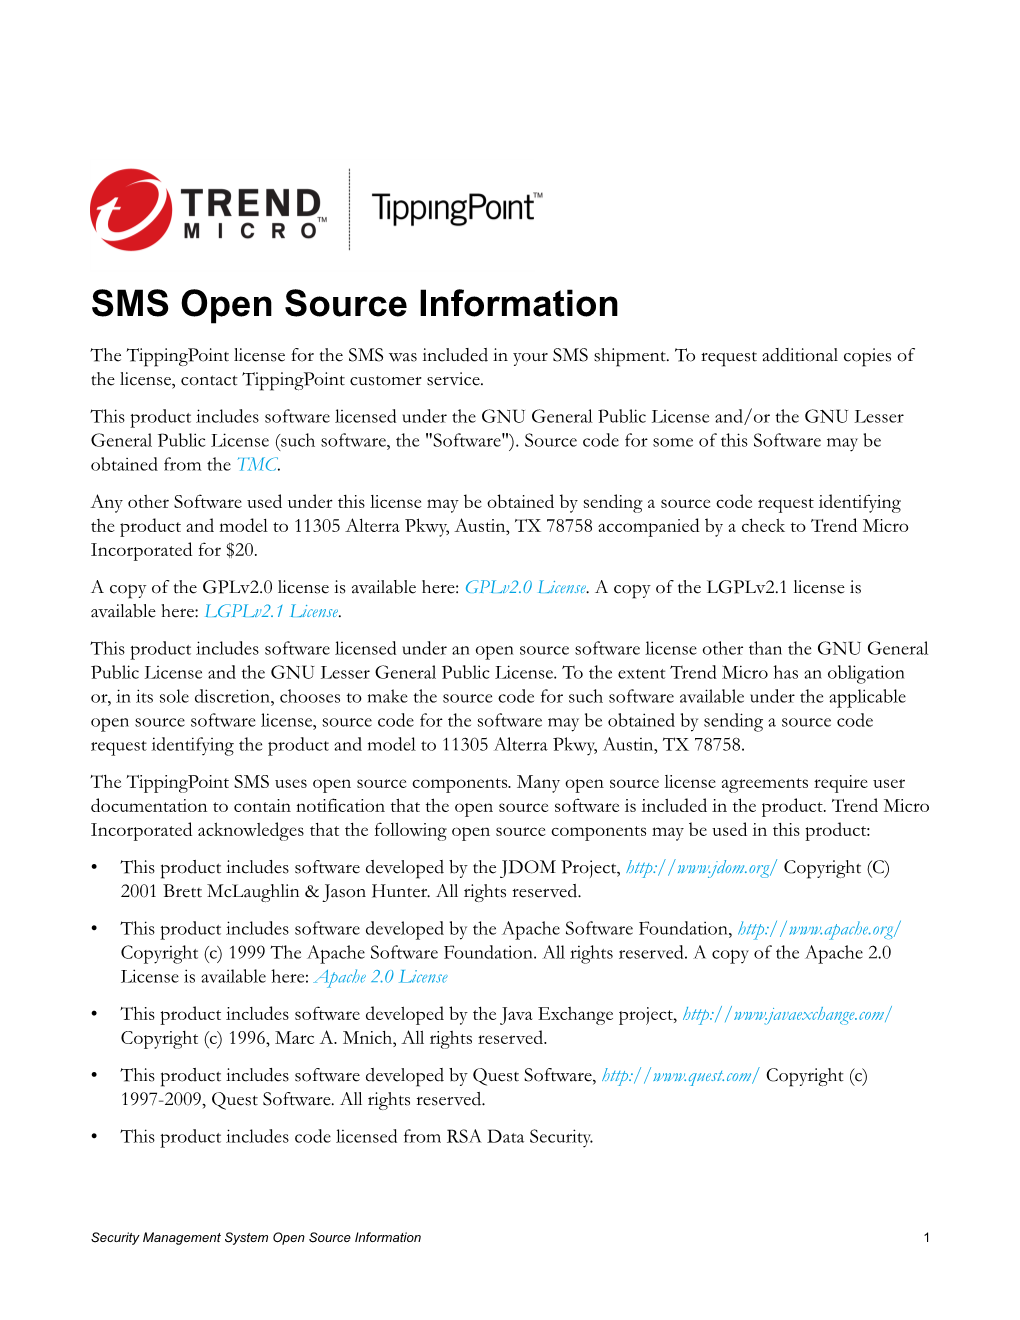 SMS Open Source Information the Tippingpoint License for the SMS Was Included in Your SMS Shipment